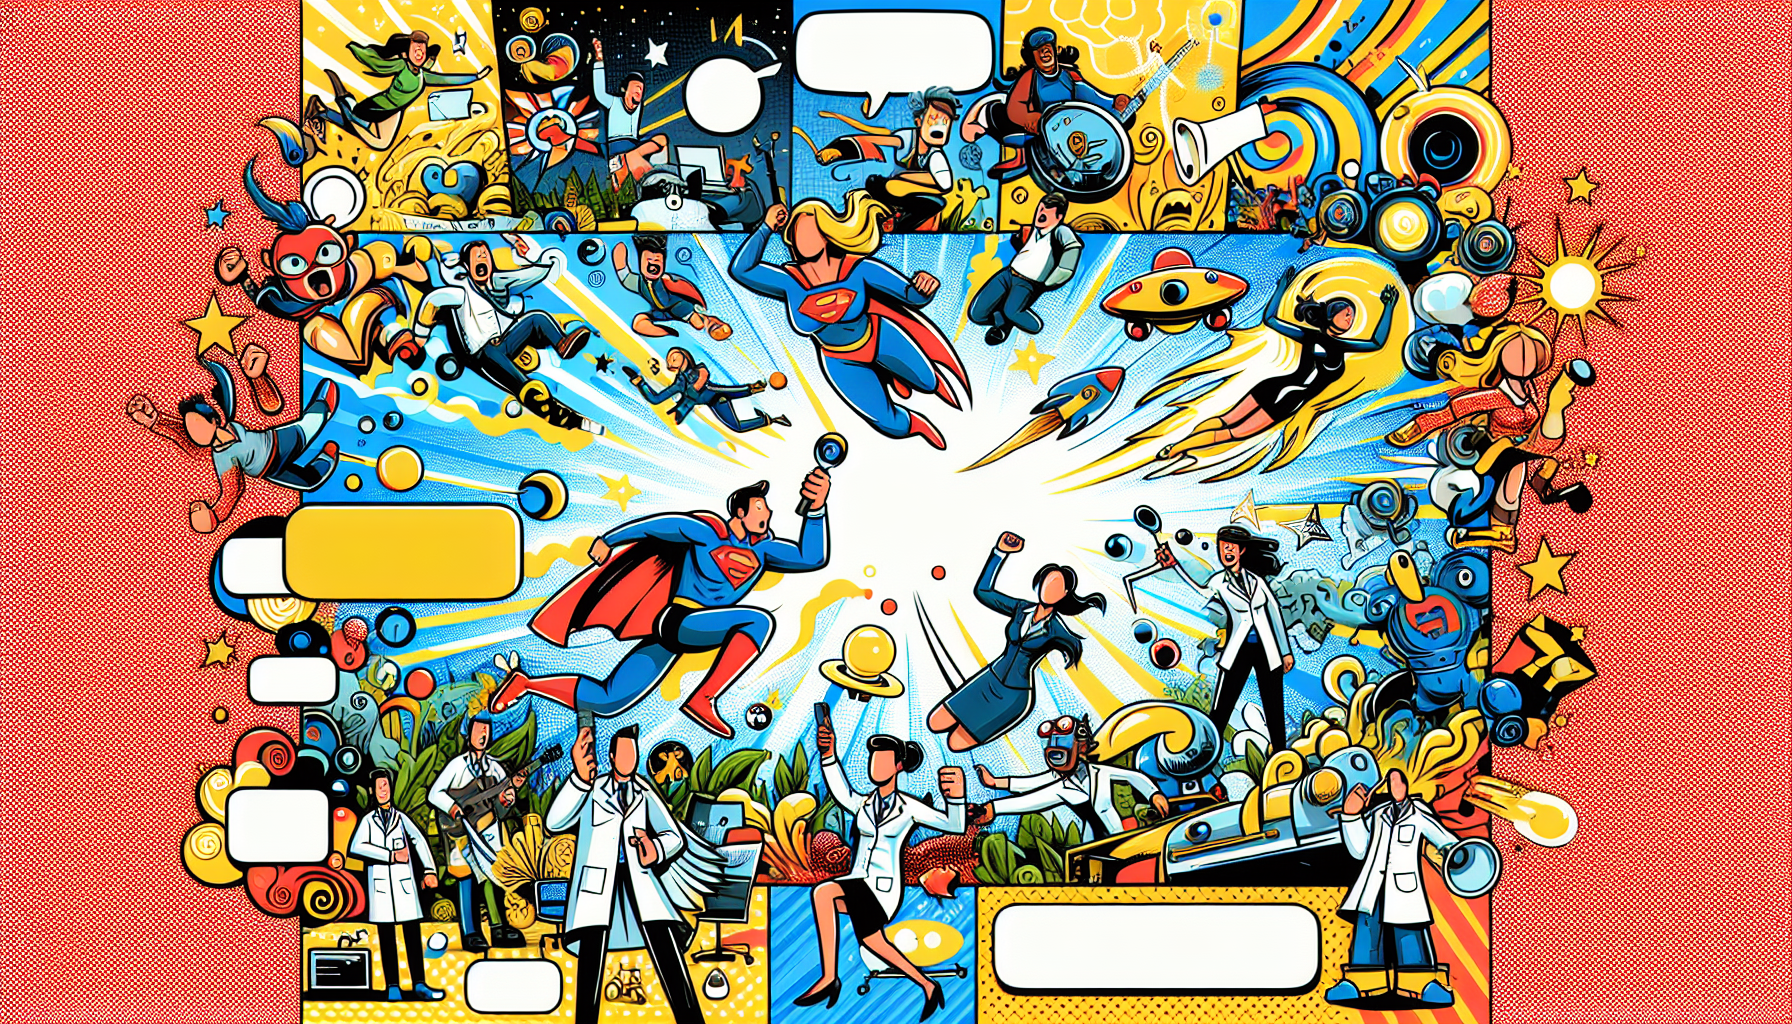 Zappos Employee Handbook cover page with a comic book theme